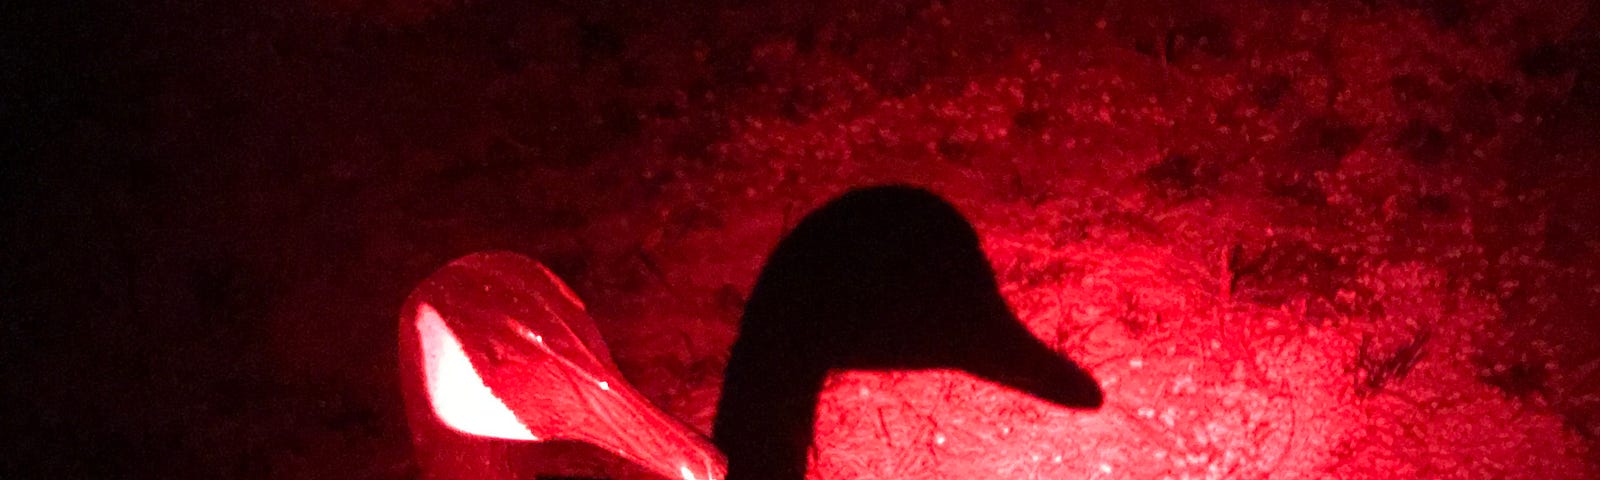 A goose decoy under in the spotlight of a red light in the dark